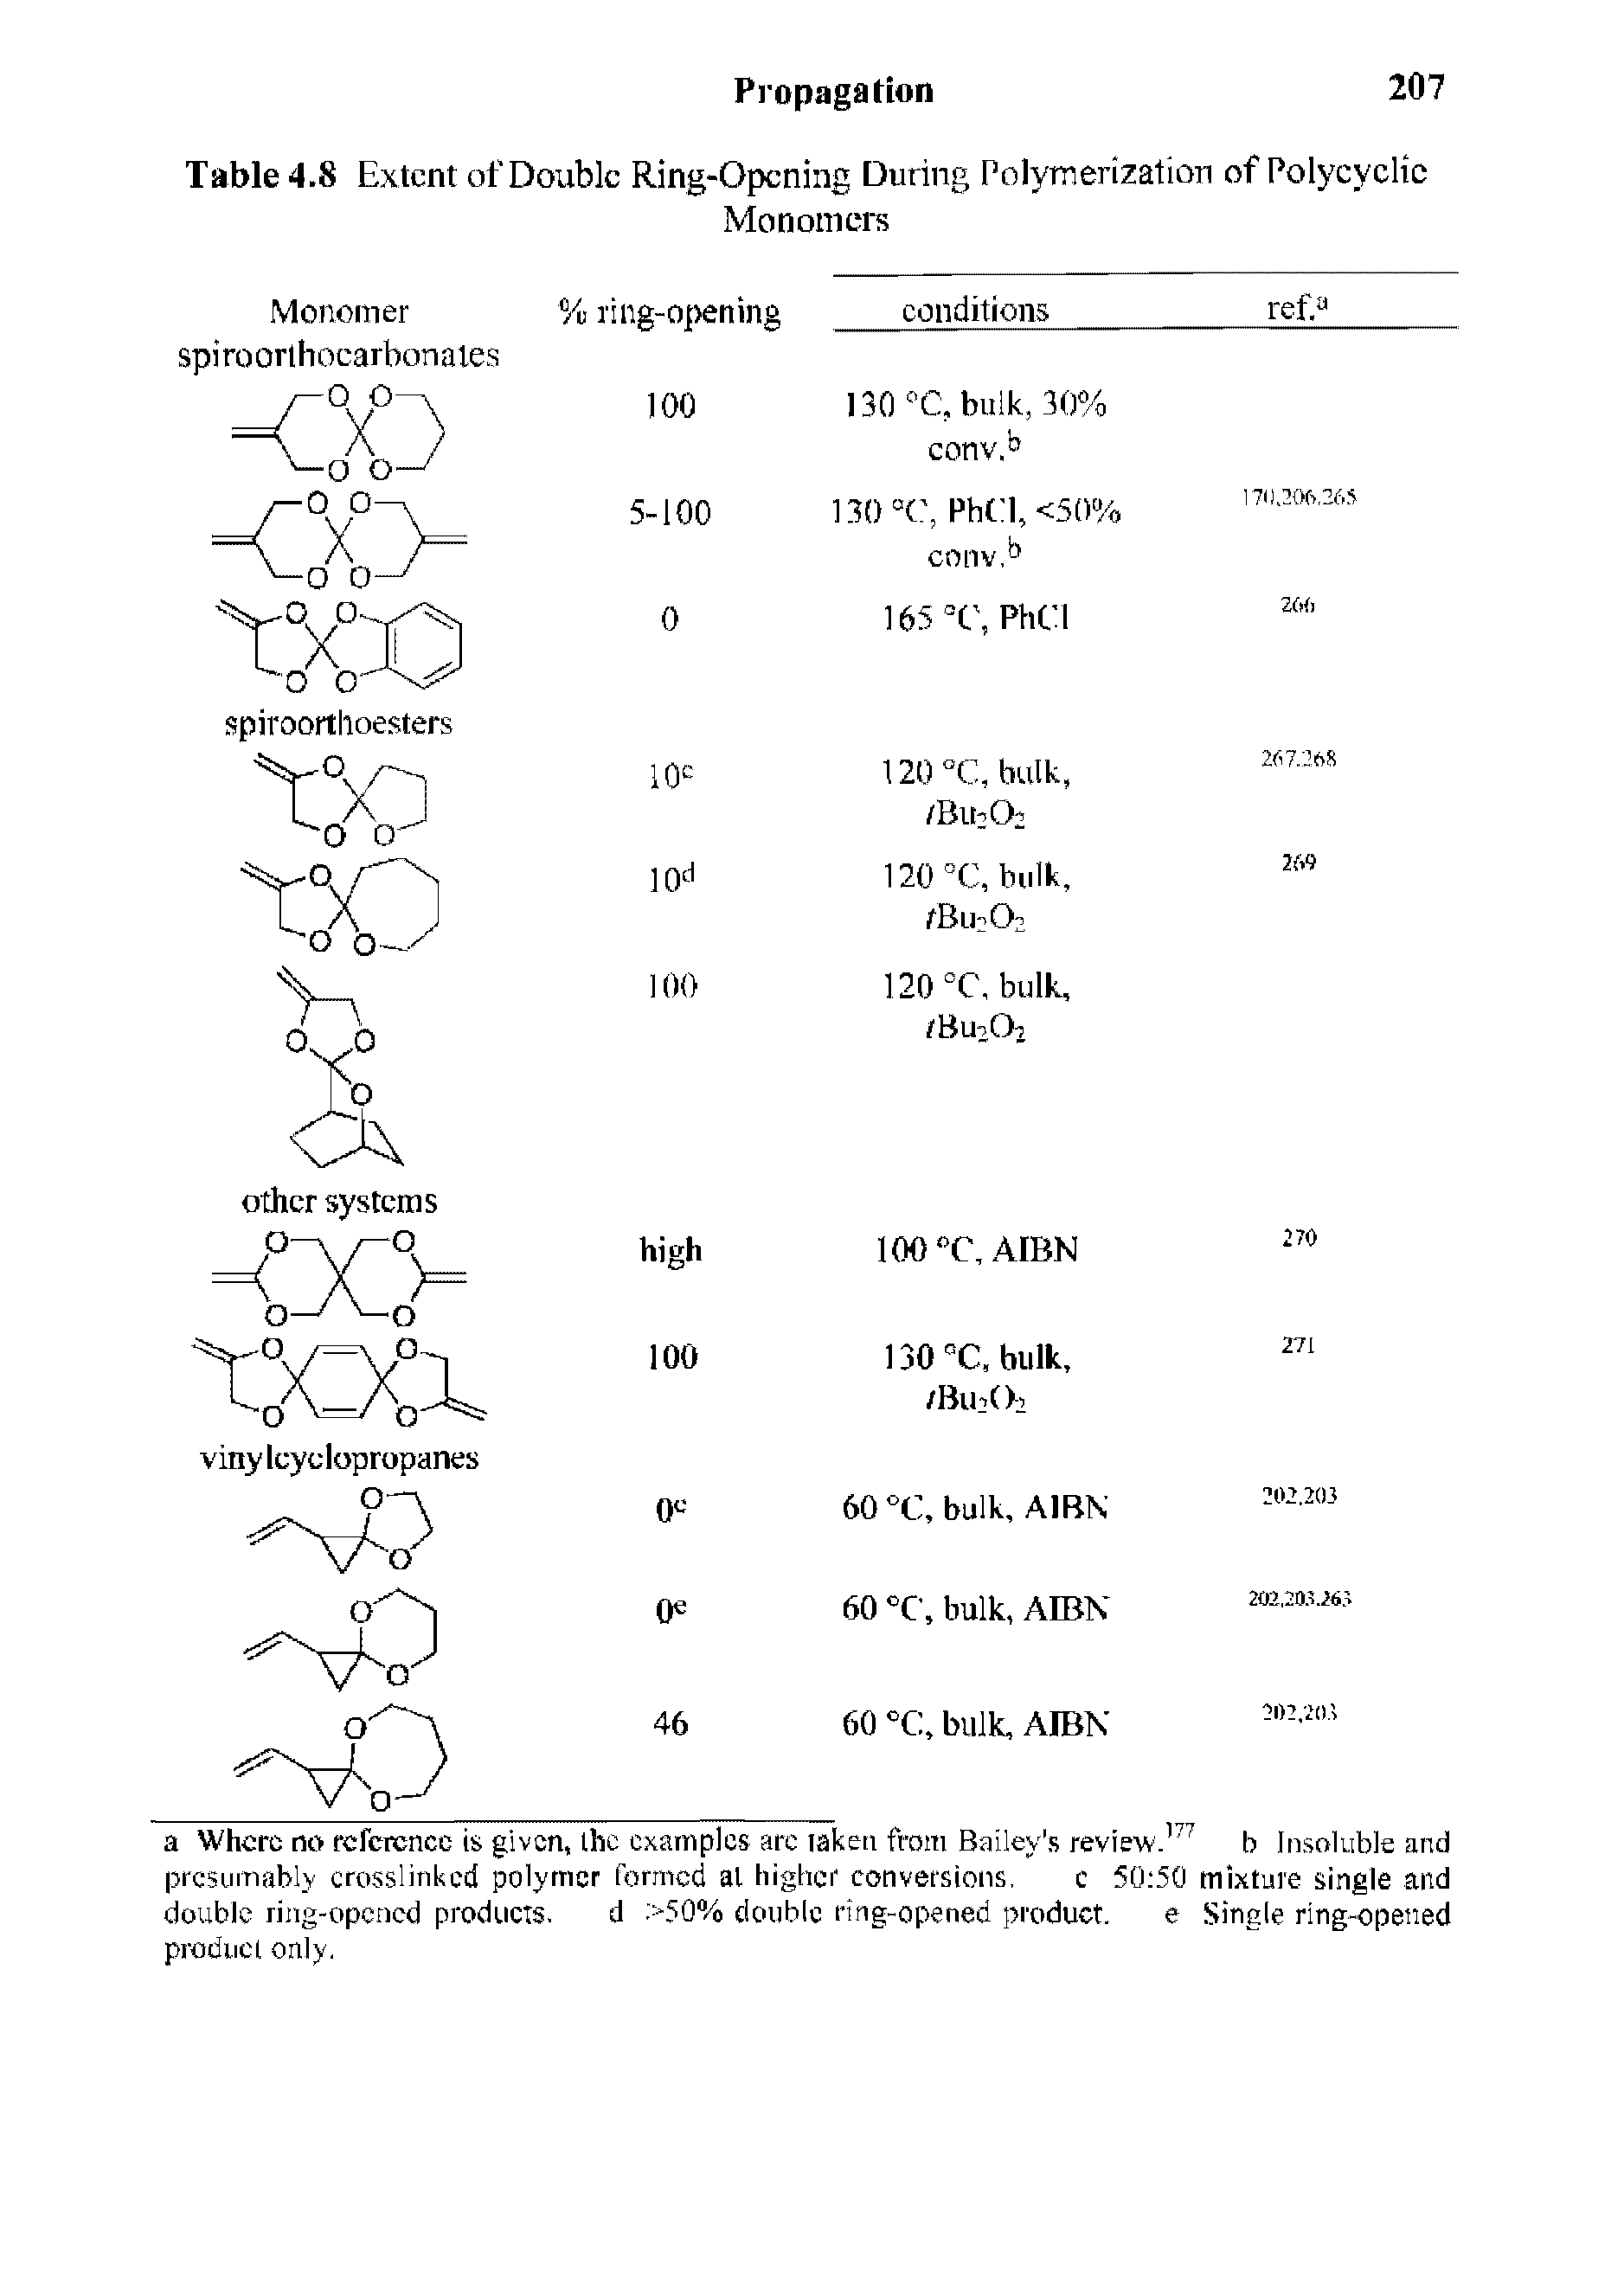 Table 4.8 Extent of Double Ring-Opening During Polymerization of Polycyclic...